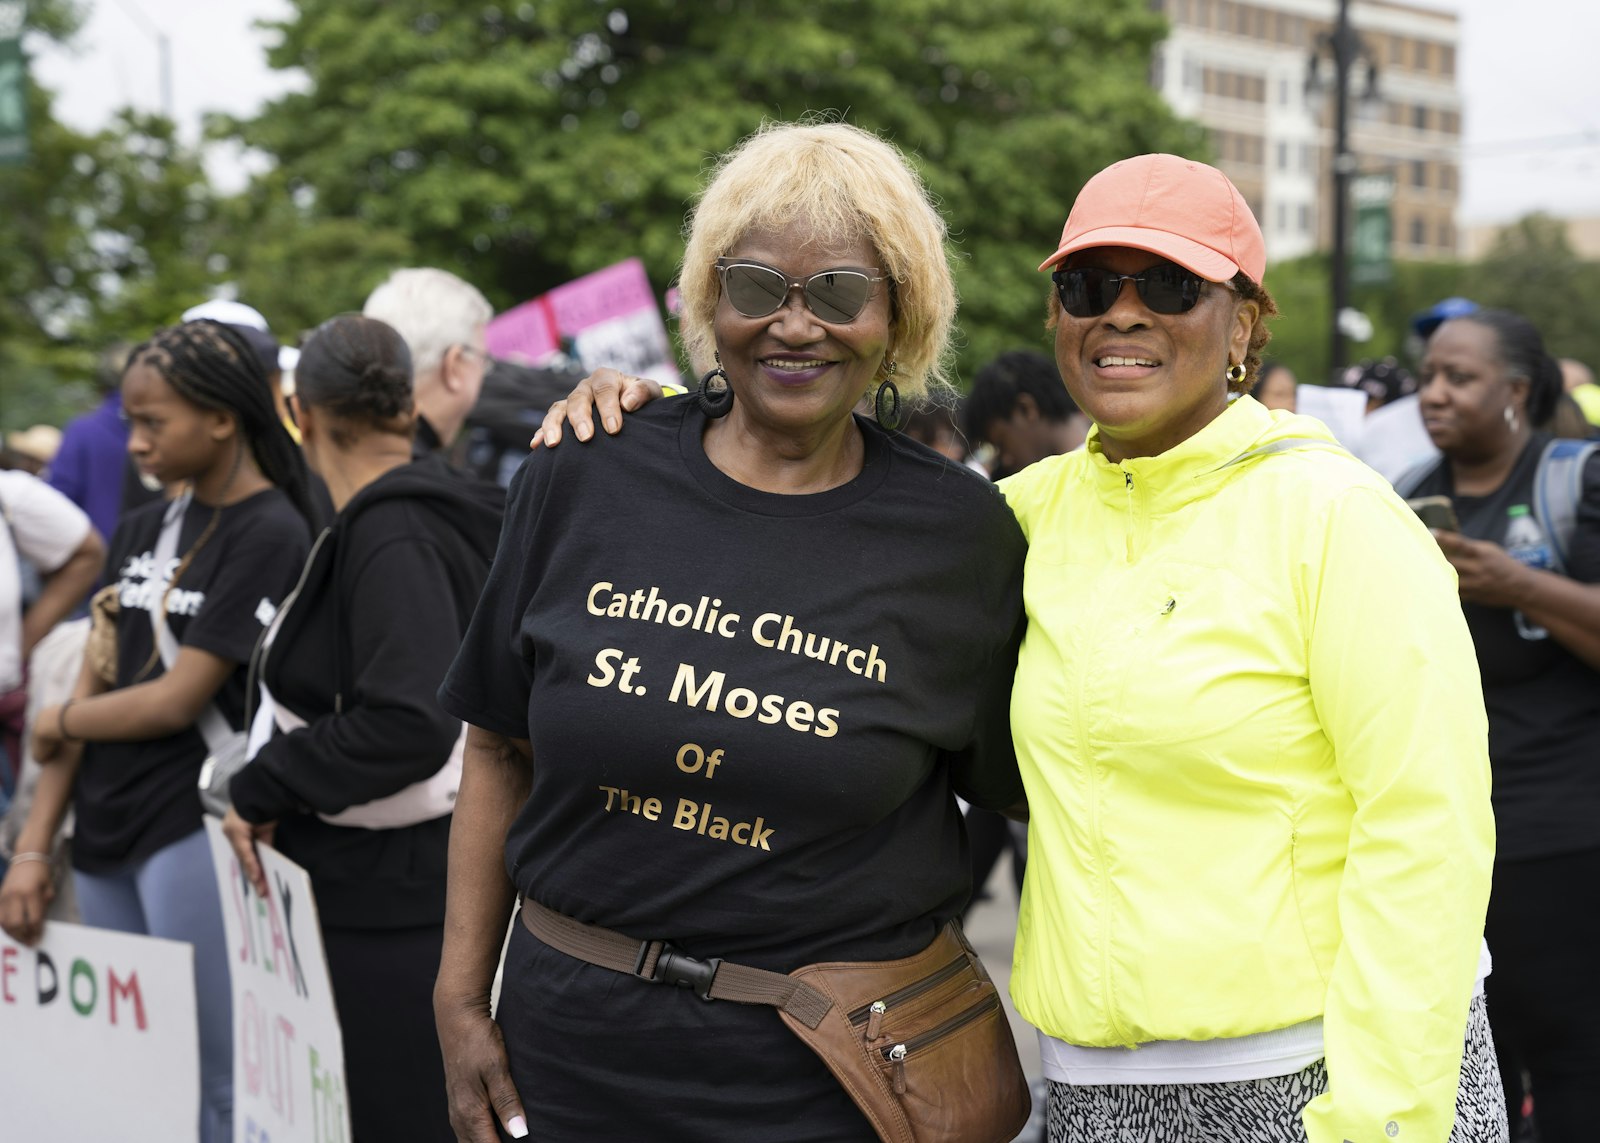 Mable Jones, left, a parishioner at St. Moses the Black Parish in Detroit, is pictured with Vickie Figueroa, associate director of cultural ministries and coordinator of Black Catholic ministry for the Archdiocese of Detroit.